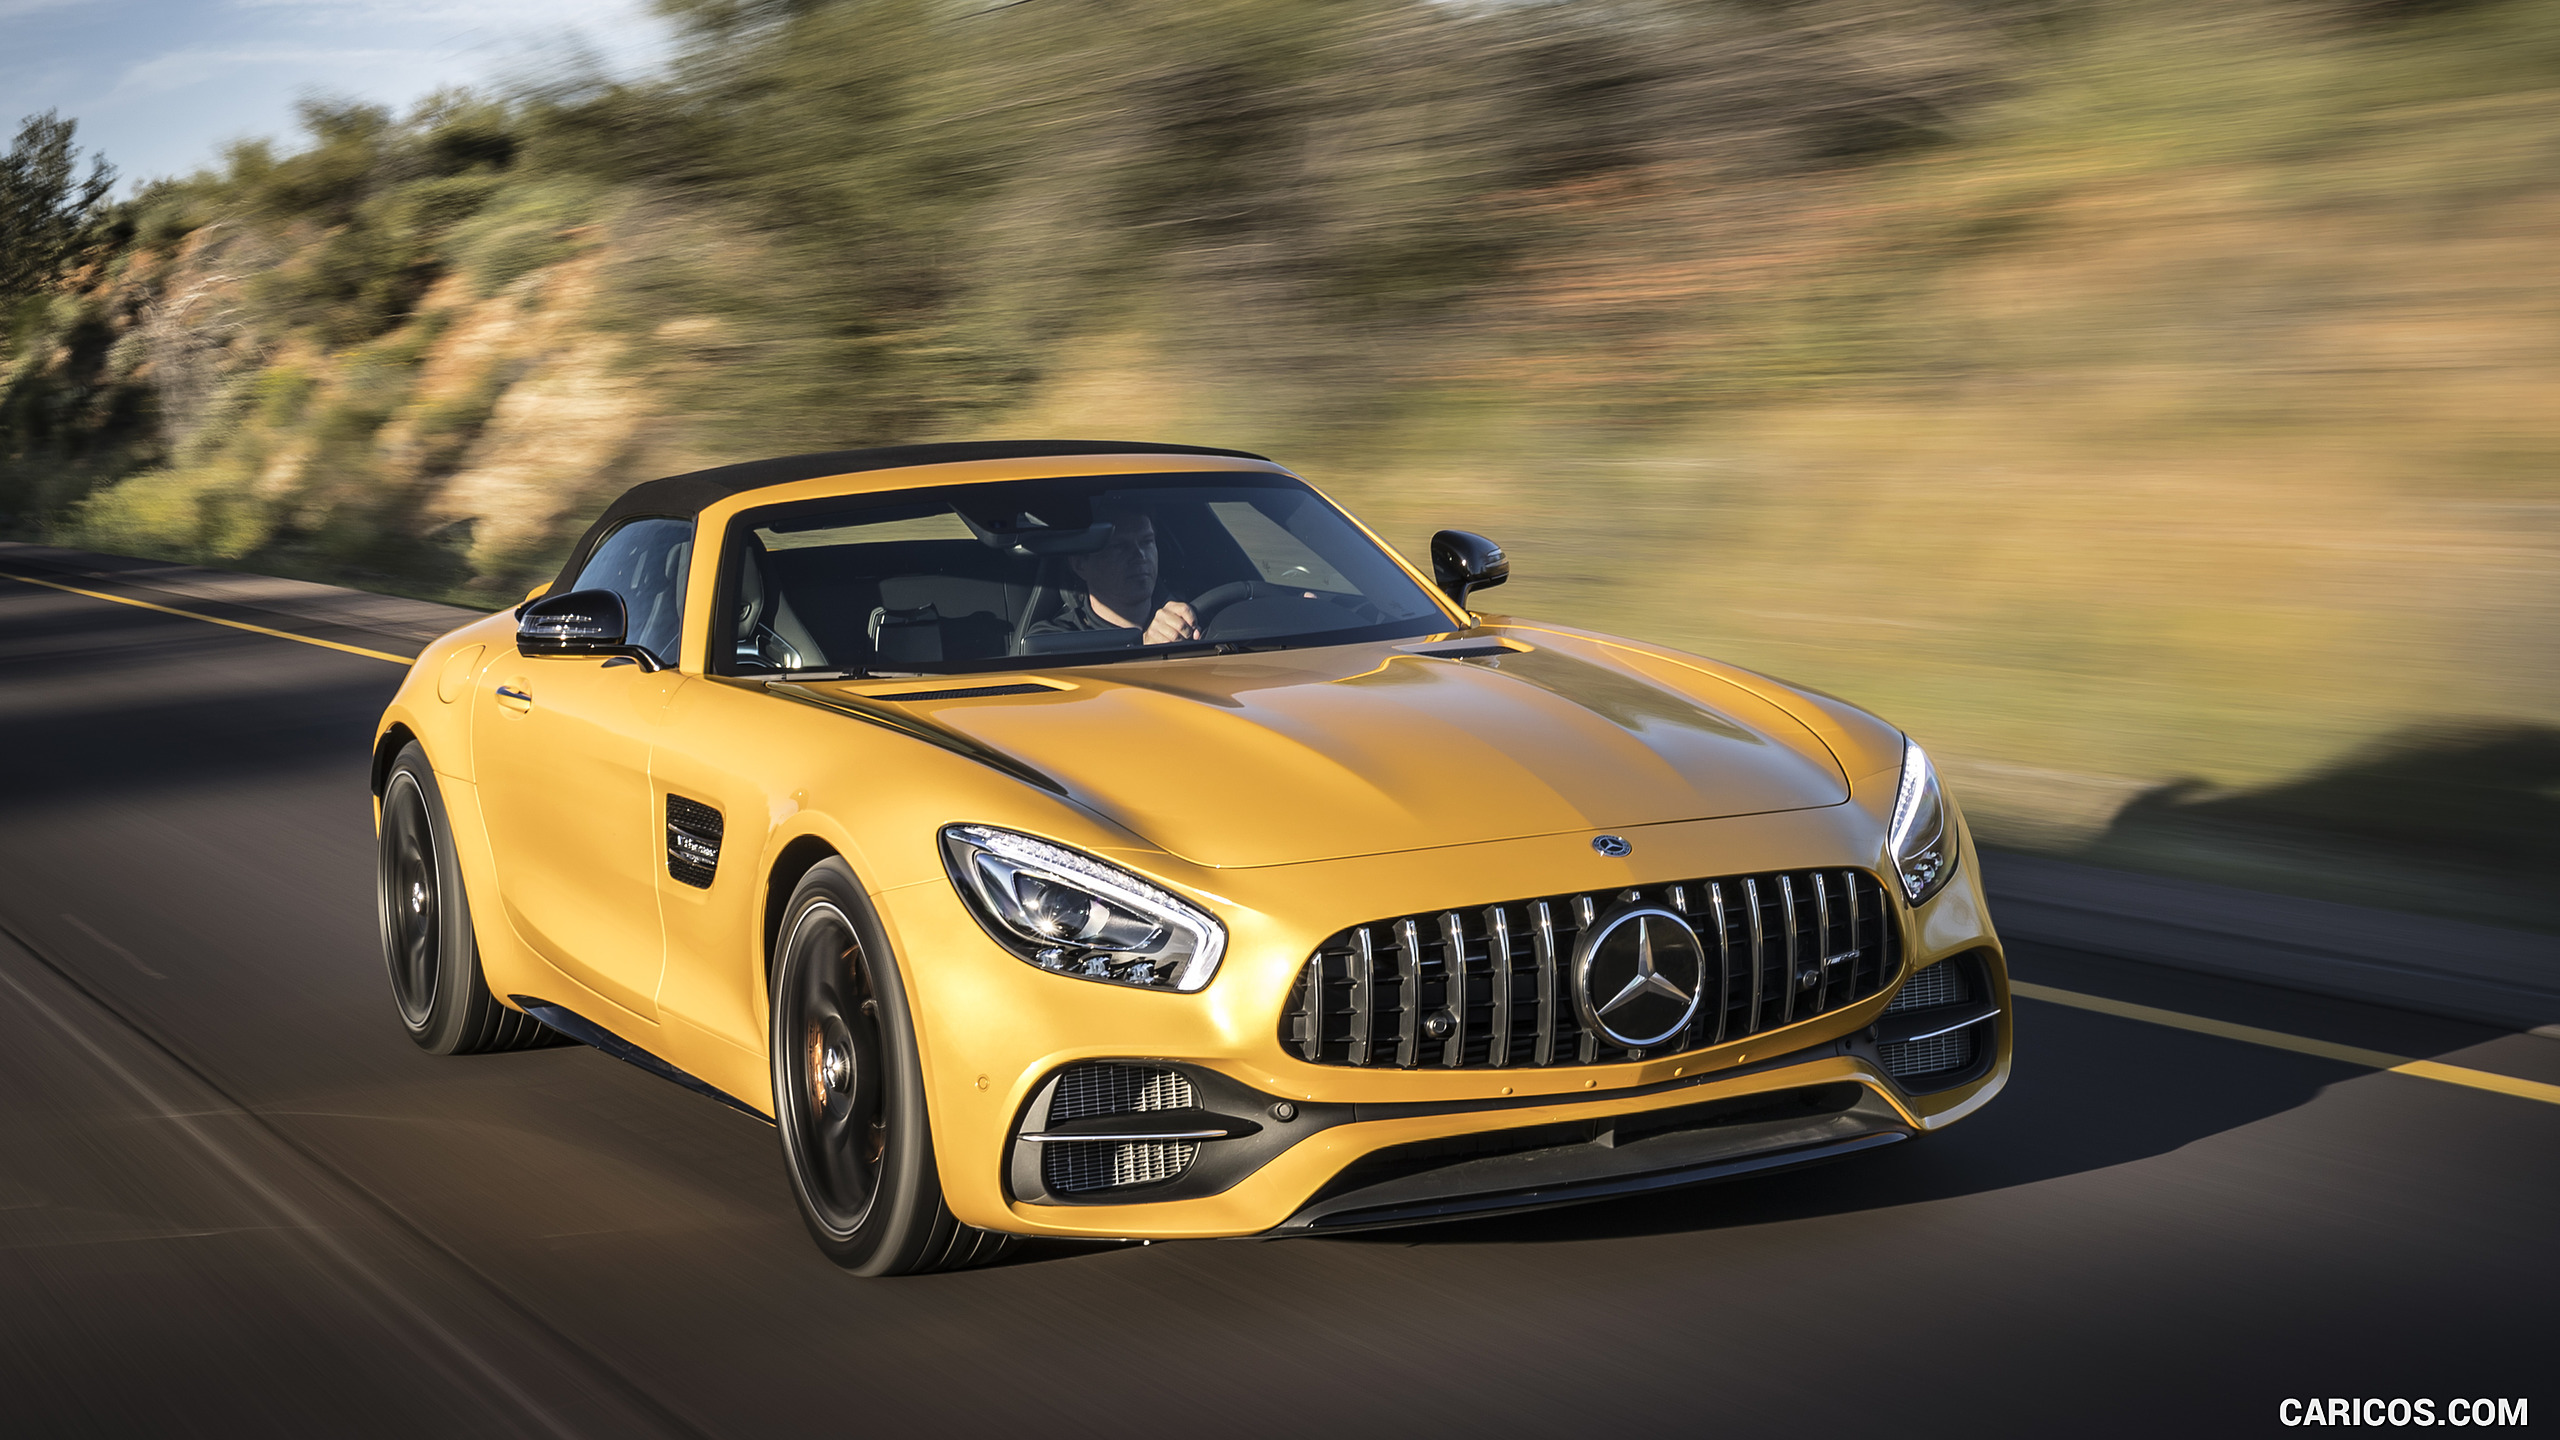 2018 Mercedes-AMG GT C Roadster - Front Three-Quarter, #199 of 350